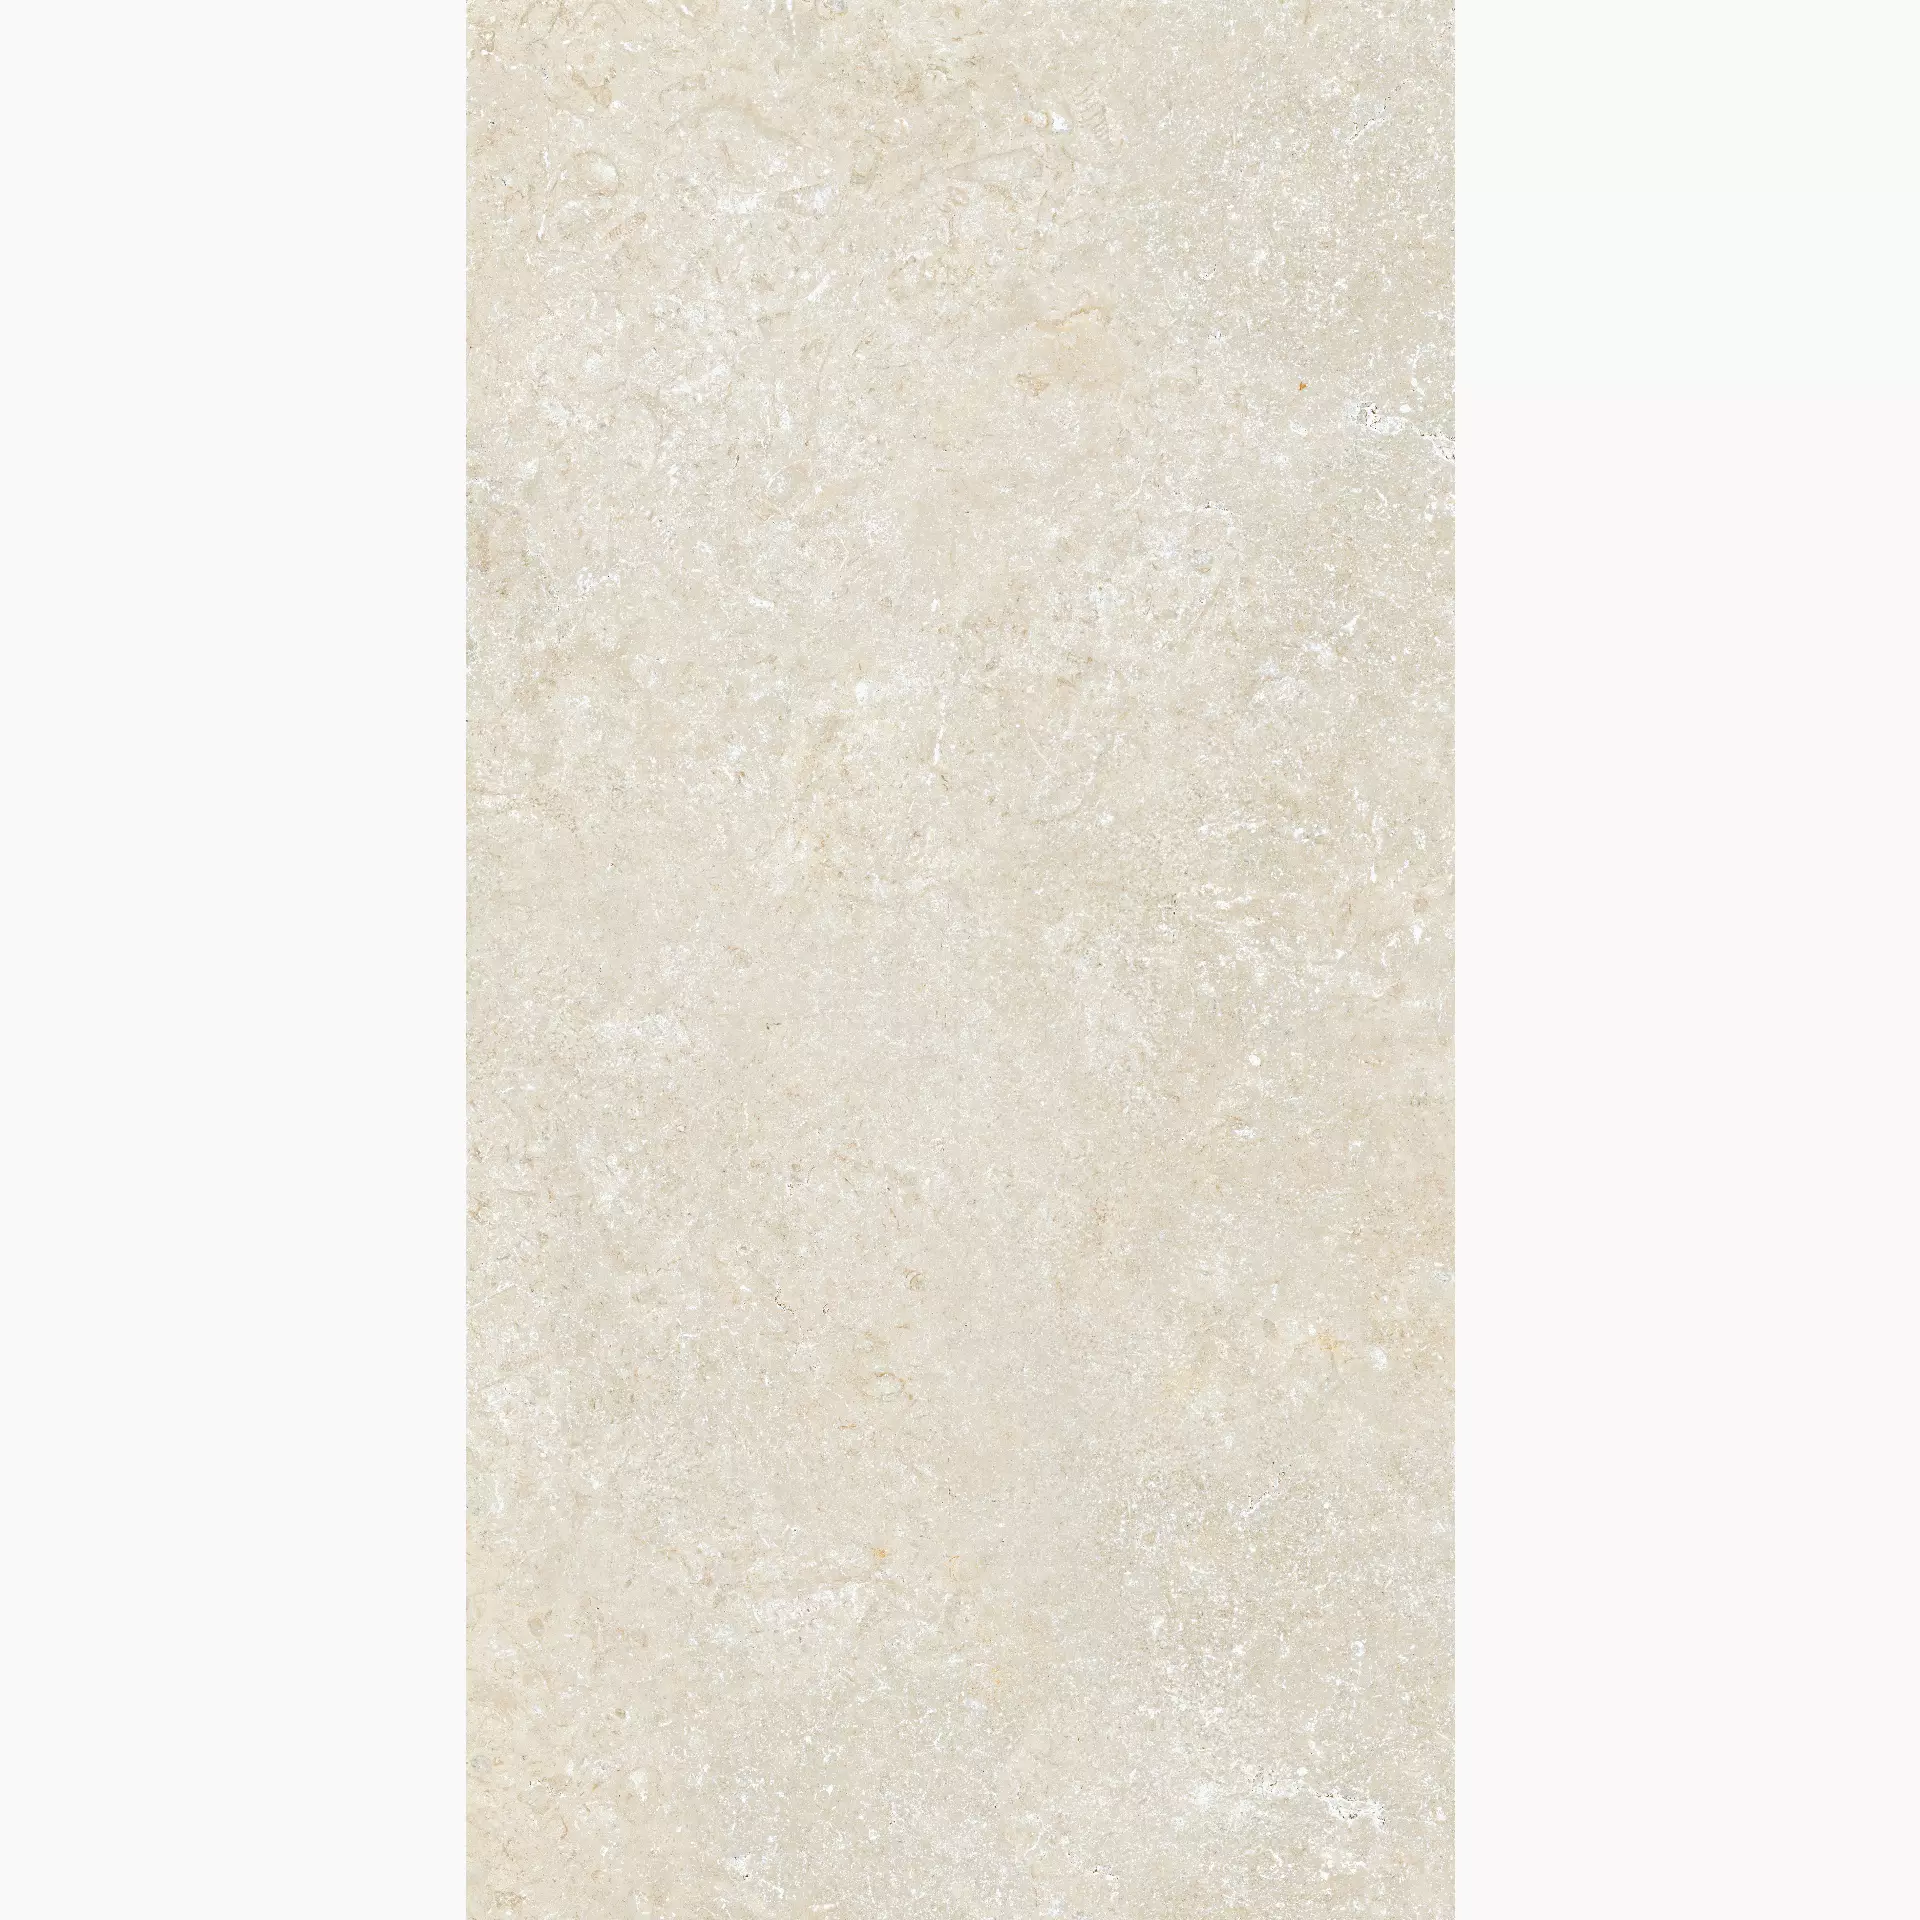 Cottodeste Secret Stone Mystery White Naturale Protect EG-SS00 30x60cm rectified 14mm